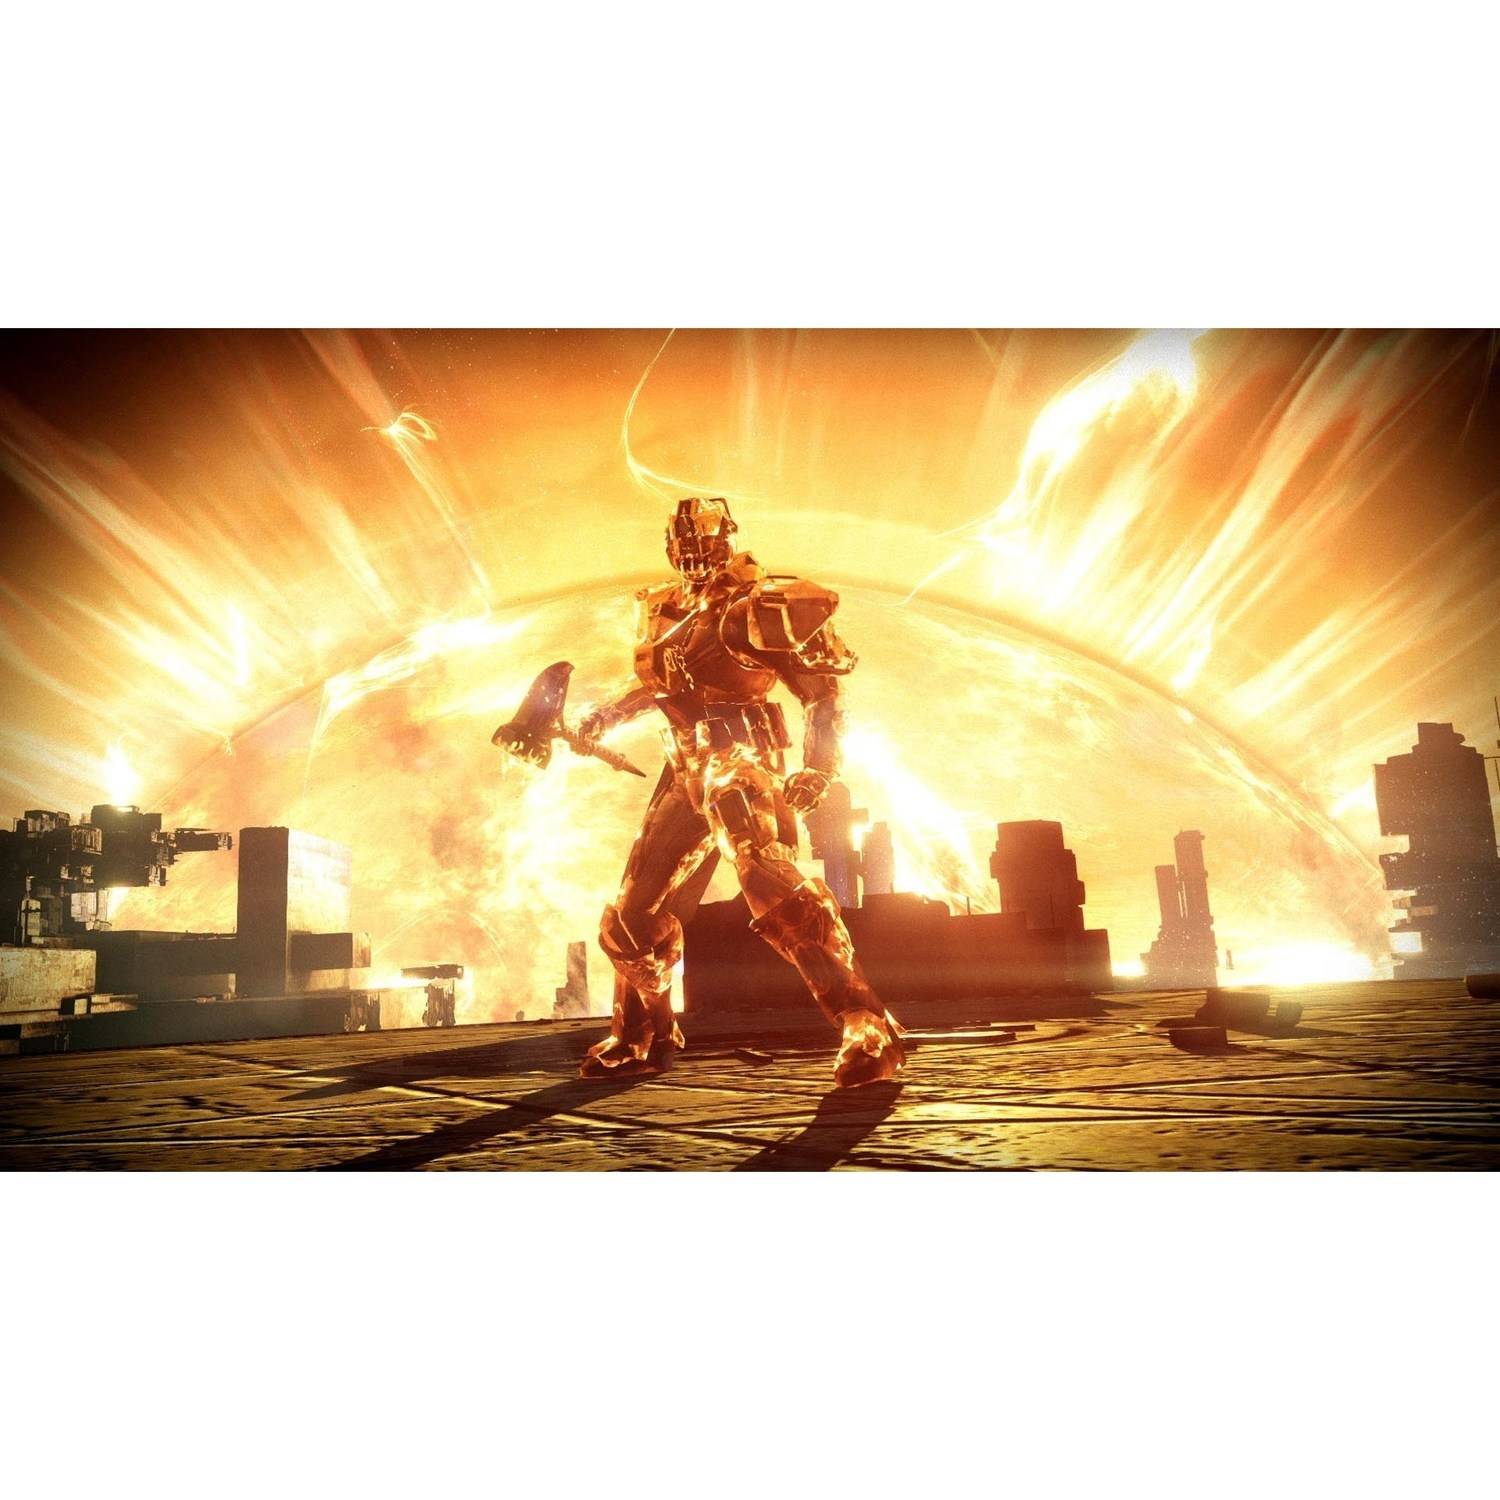 Destiny: The Taken King Legendary Edition, Activision, PlayStation 4, 047875874428 - image 7 of 31